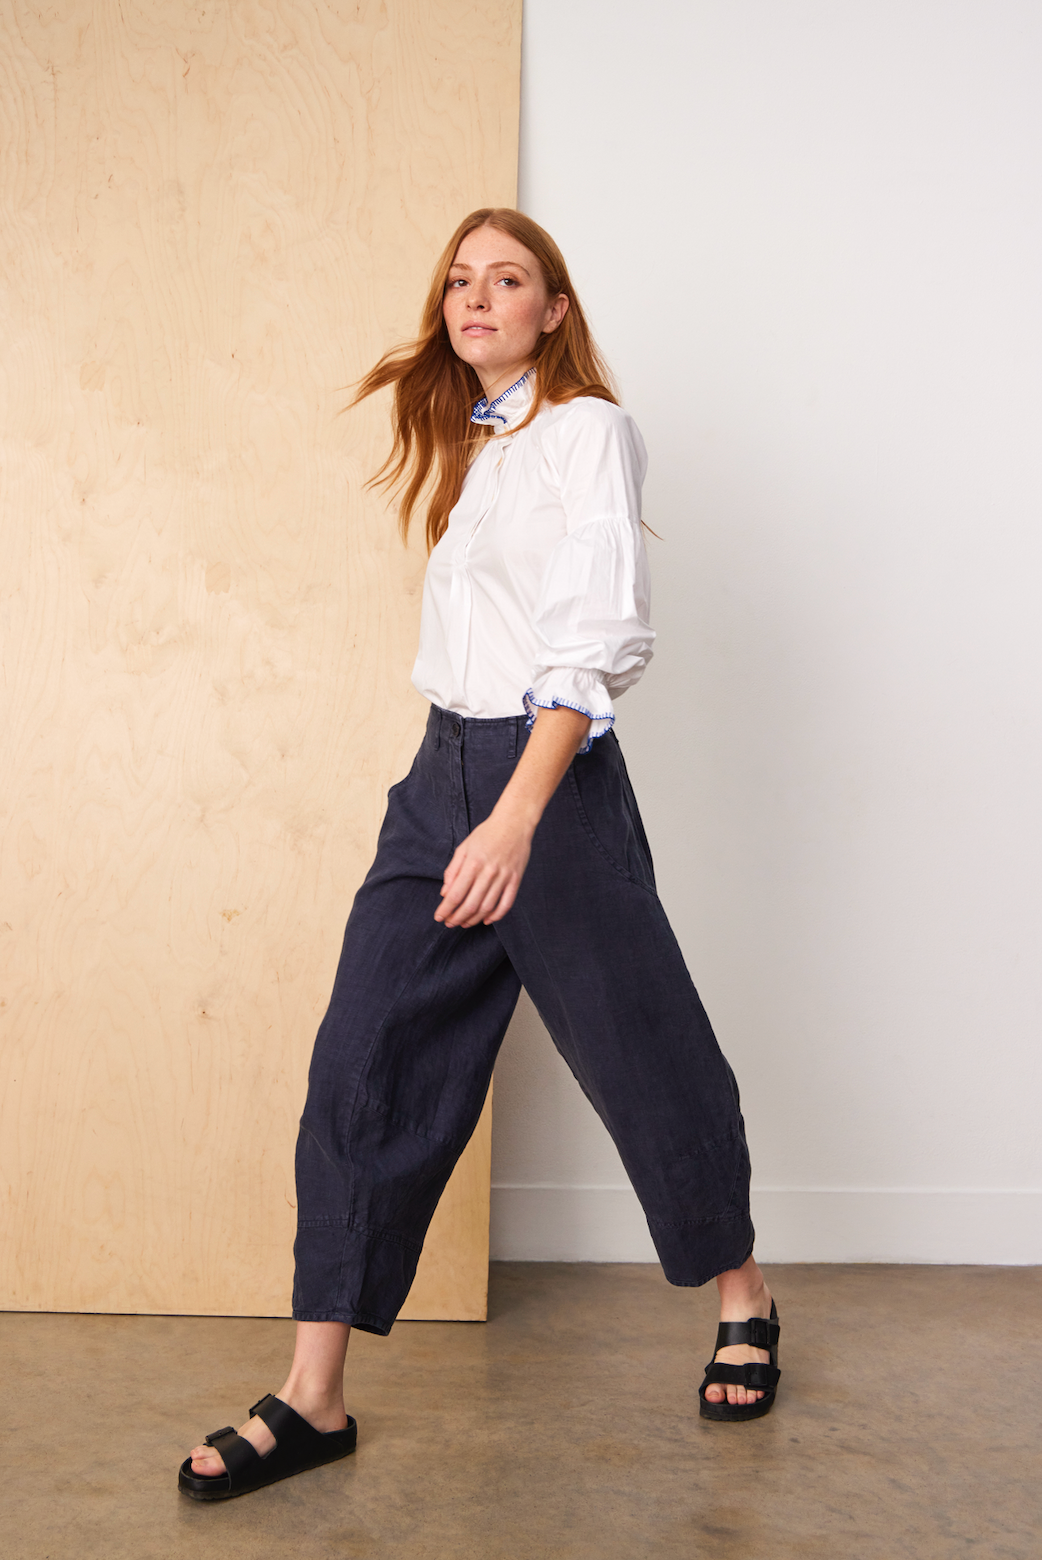 The Workwear Trousers